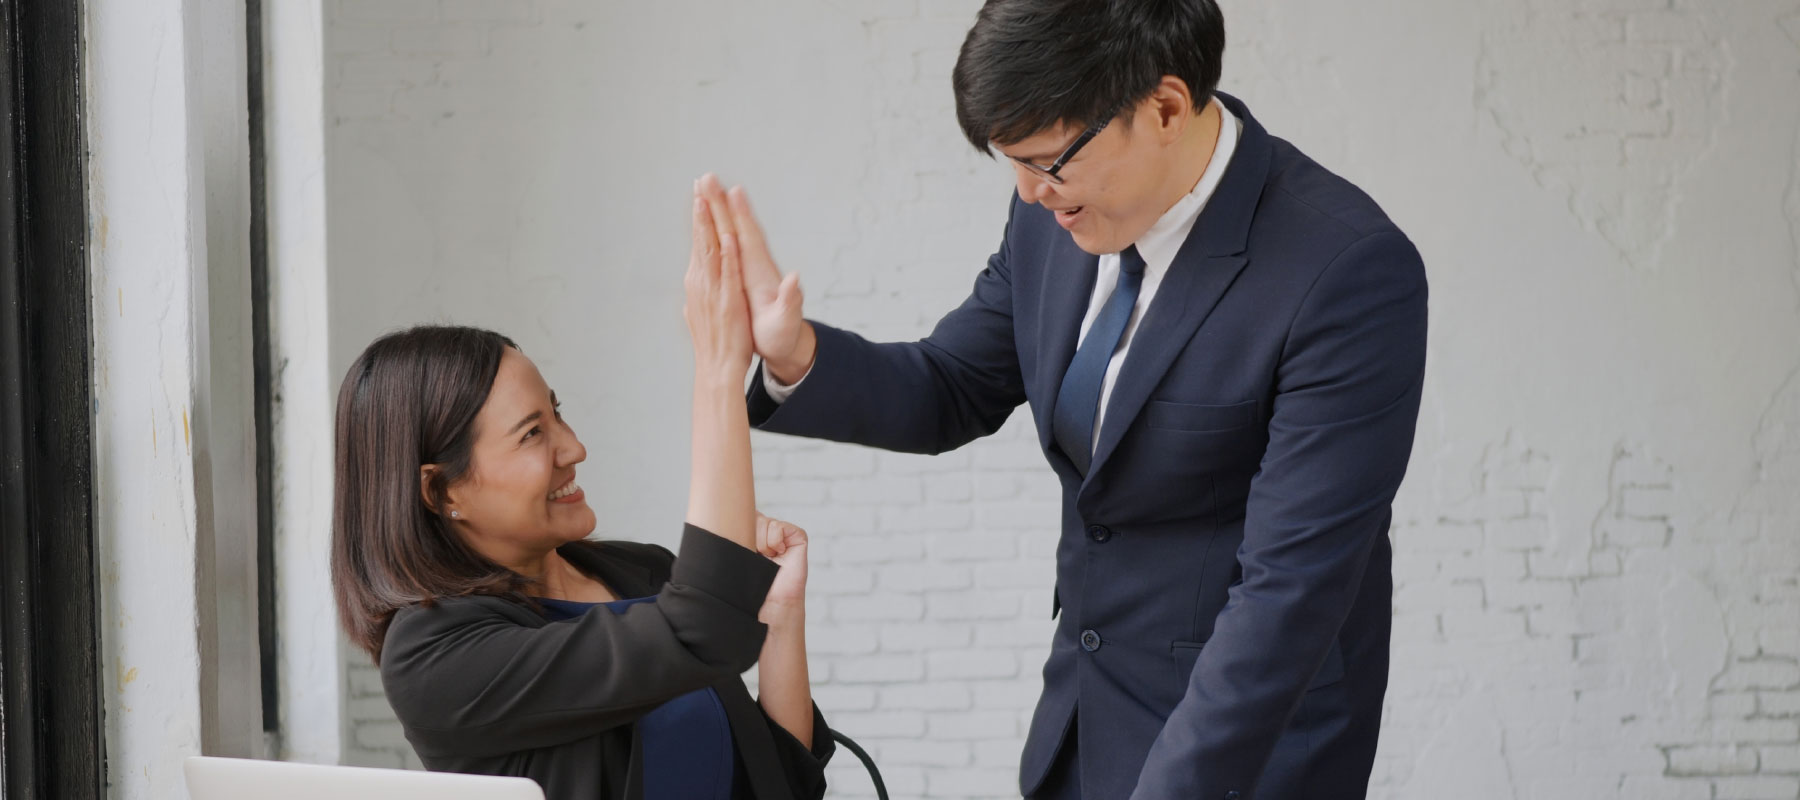 Corporate man and woman giving eachother a high five